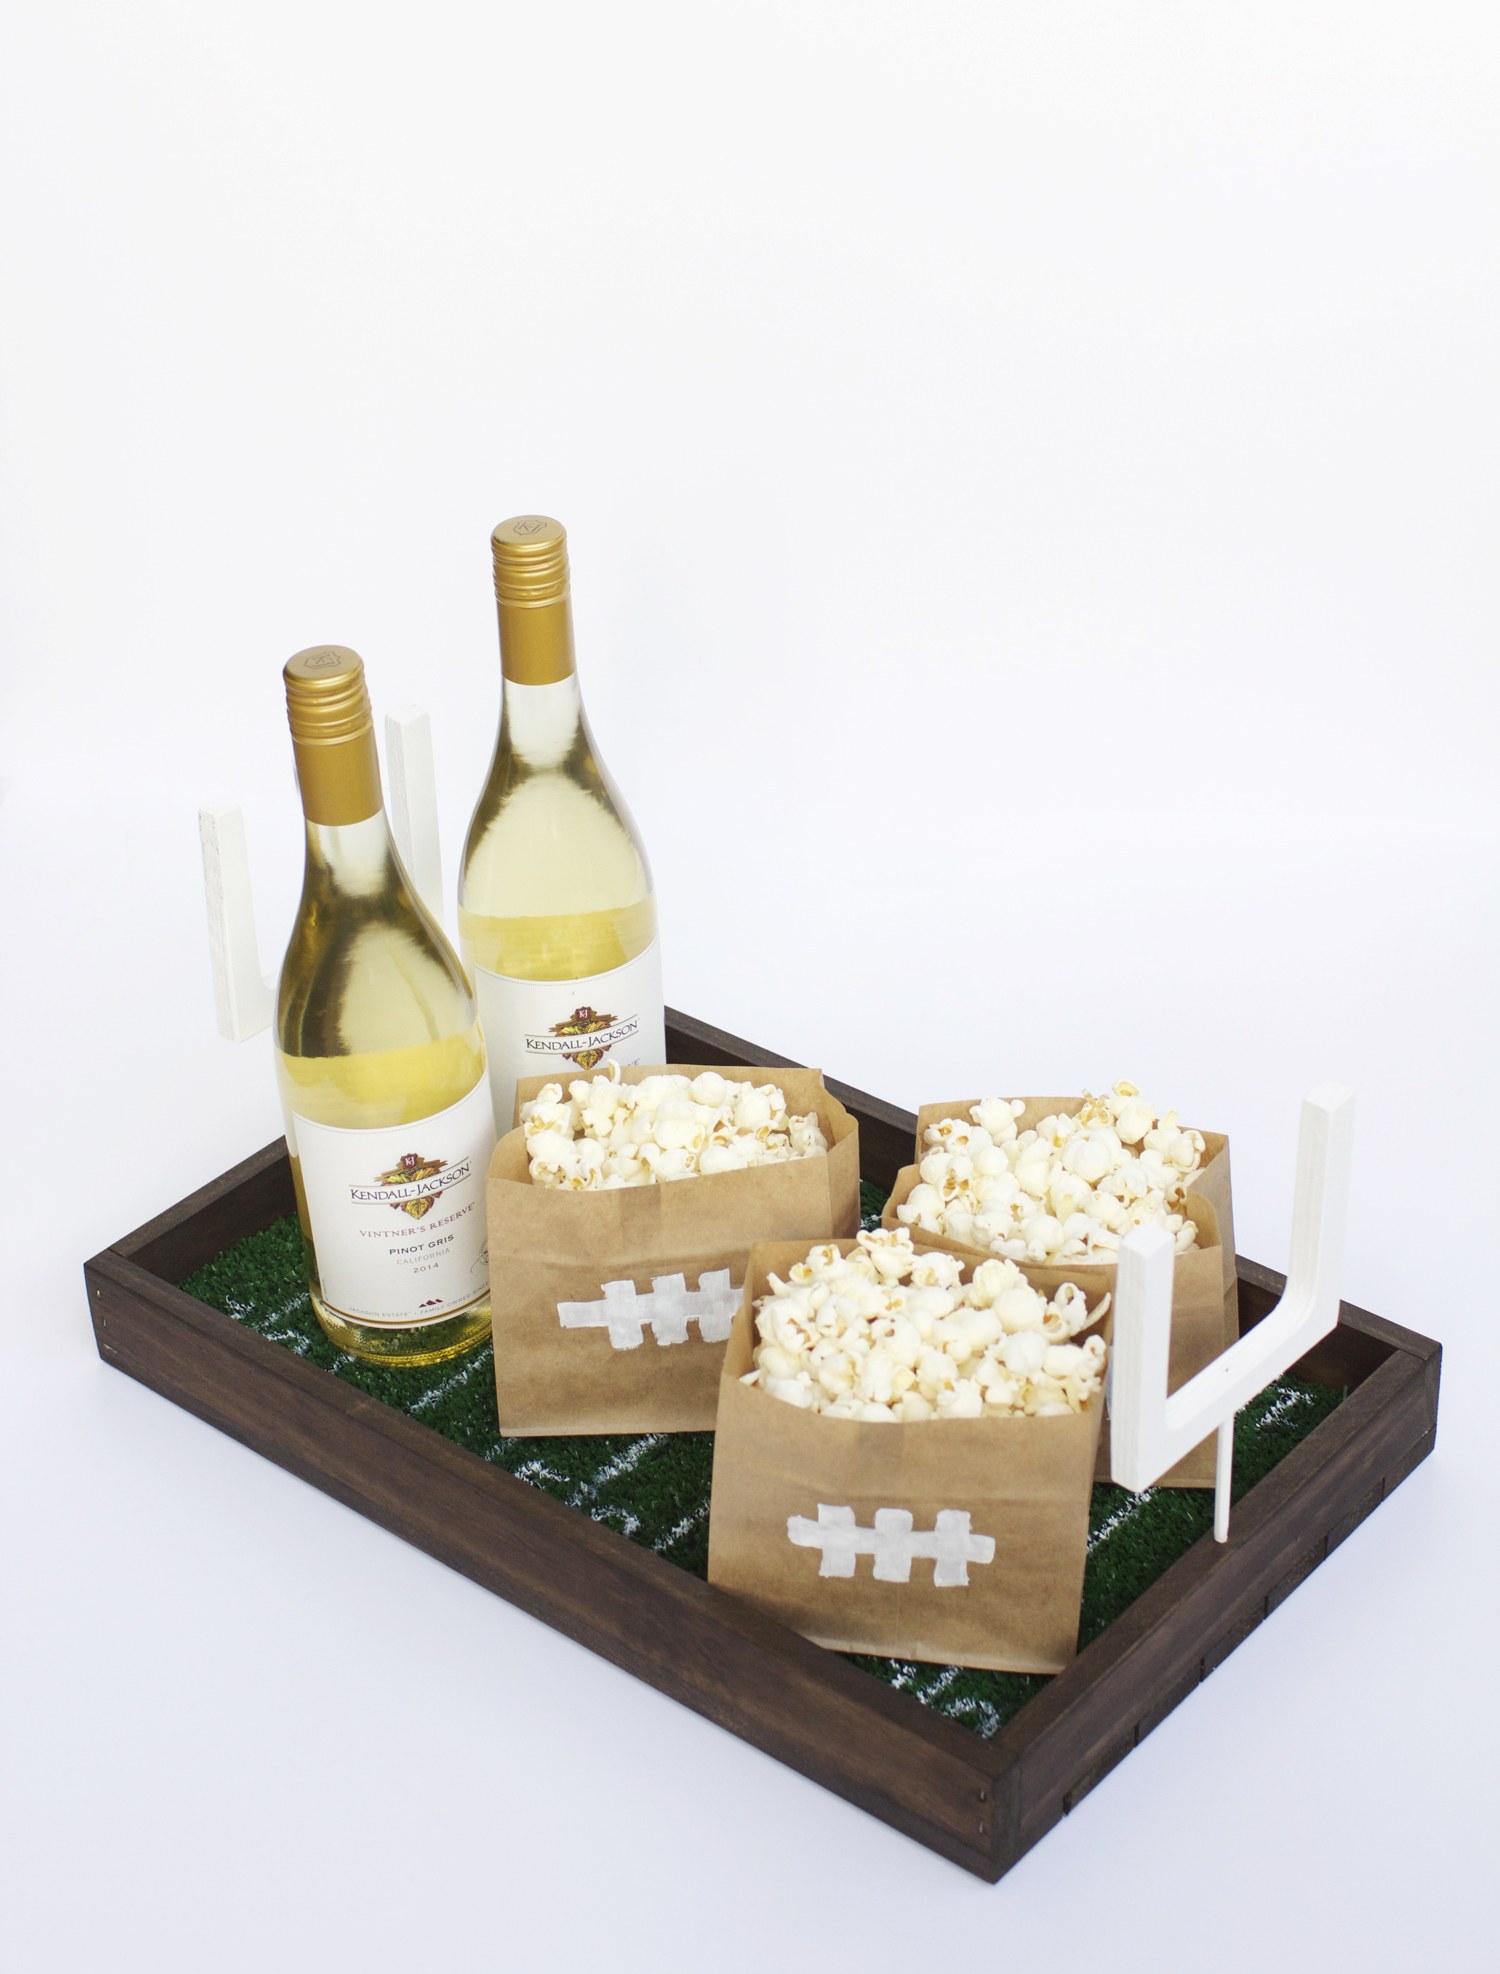 No matter which team you’re rooting for, this DIY football field serving tray will make your snacks and wine feel even more special.